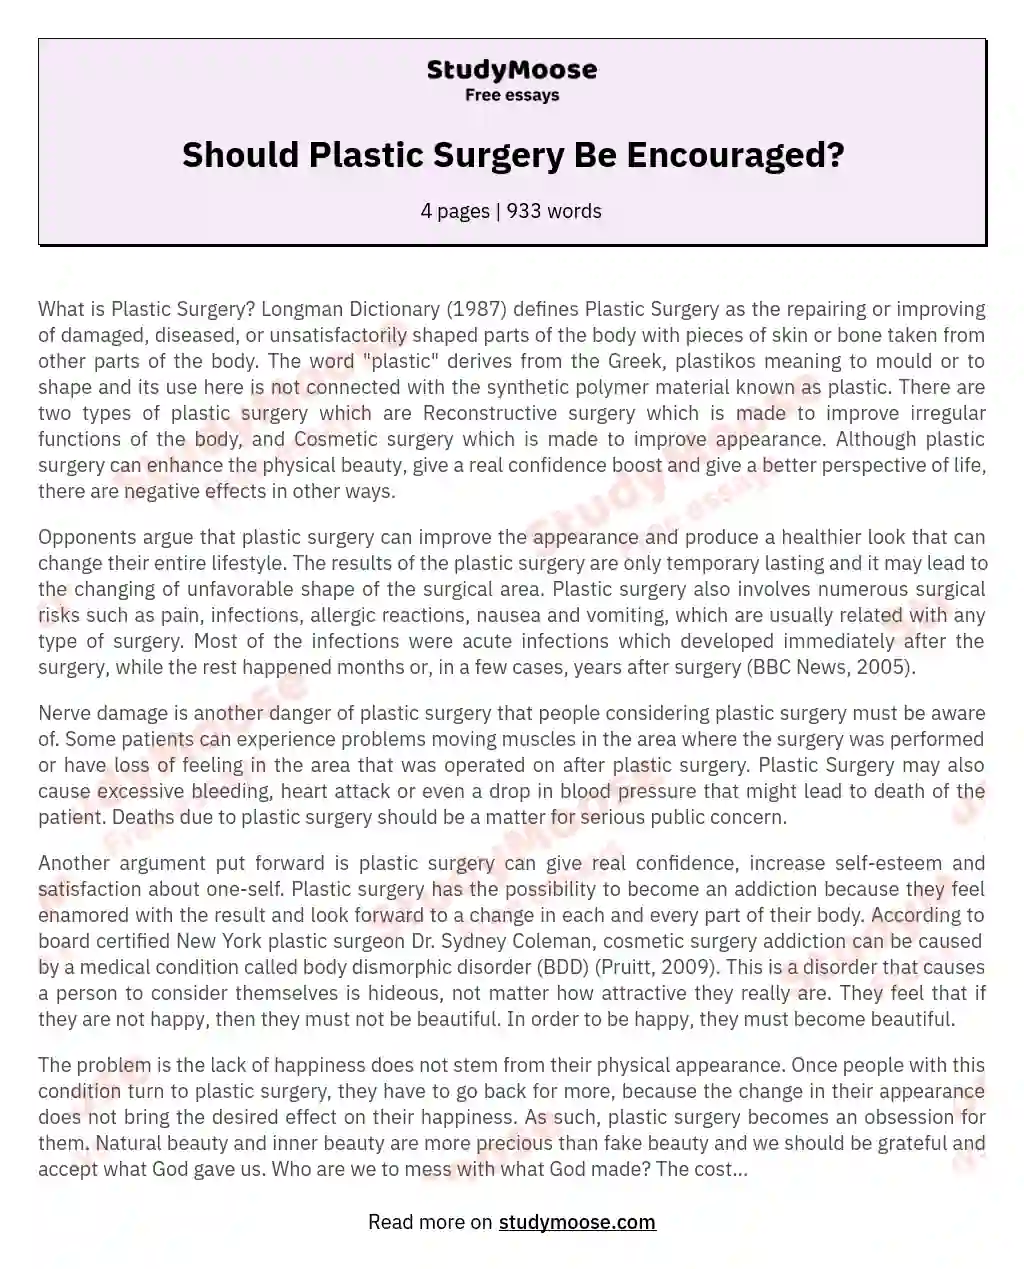 Should Plastic Surgery Be Encouraged?